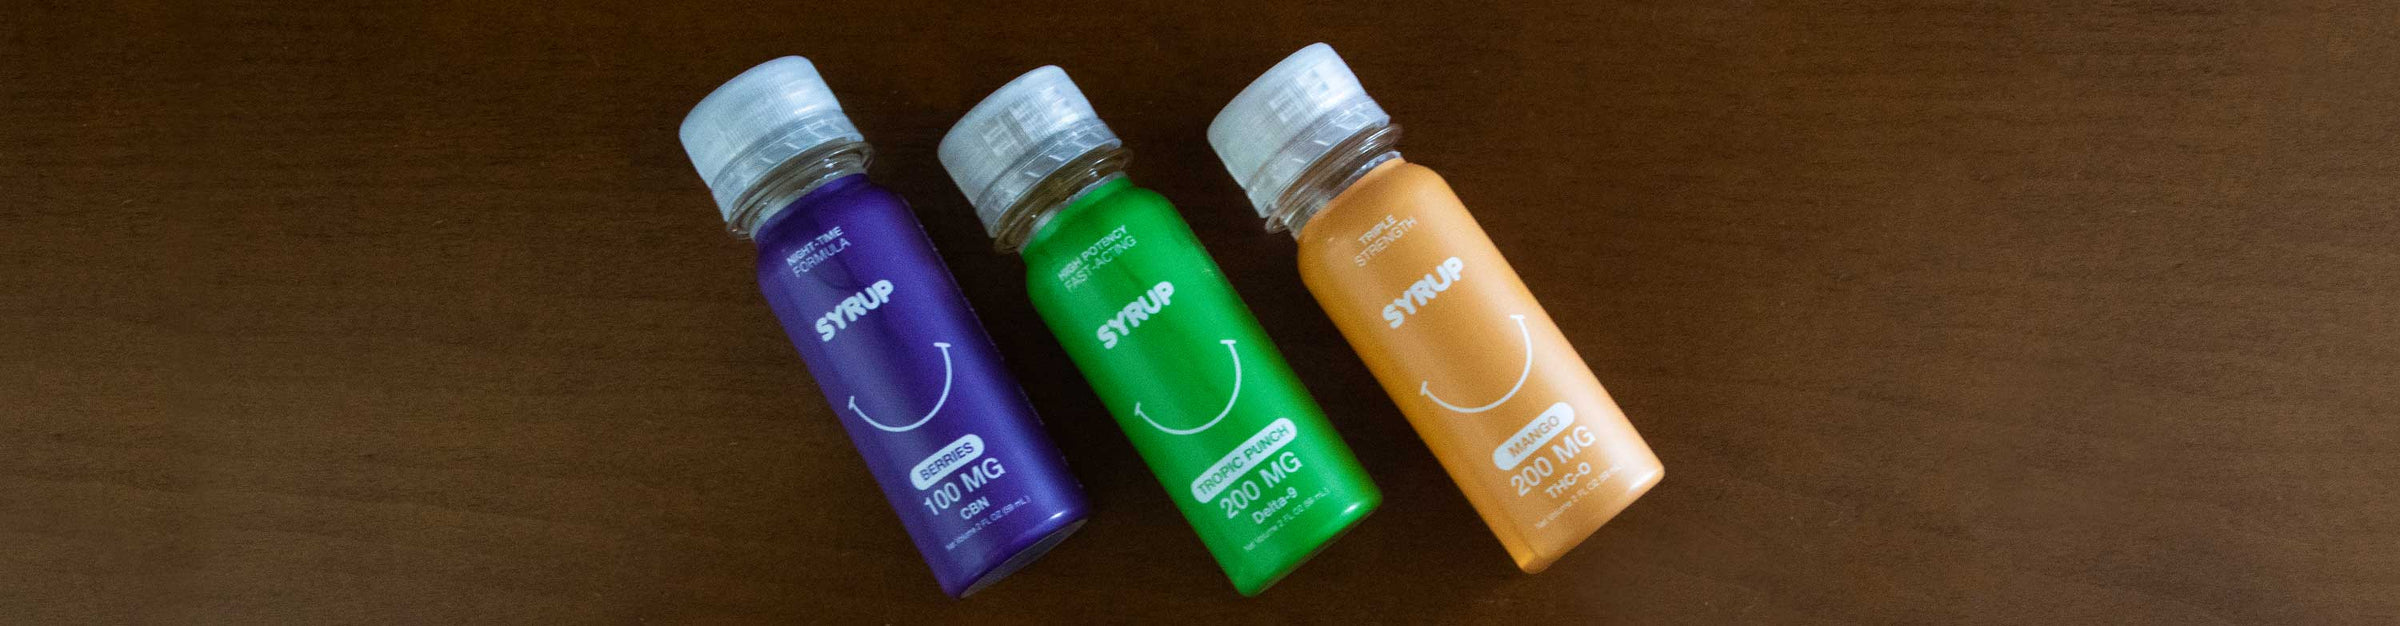 Sweet Life CBD Syrup flavors laying down on wooden table